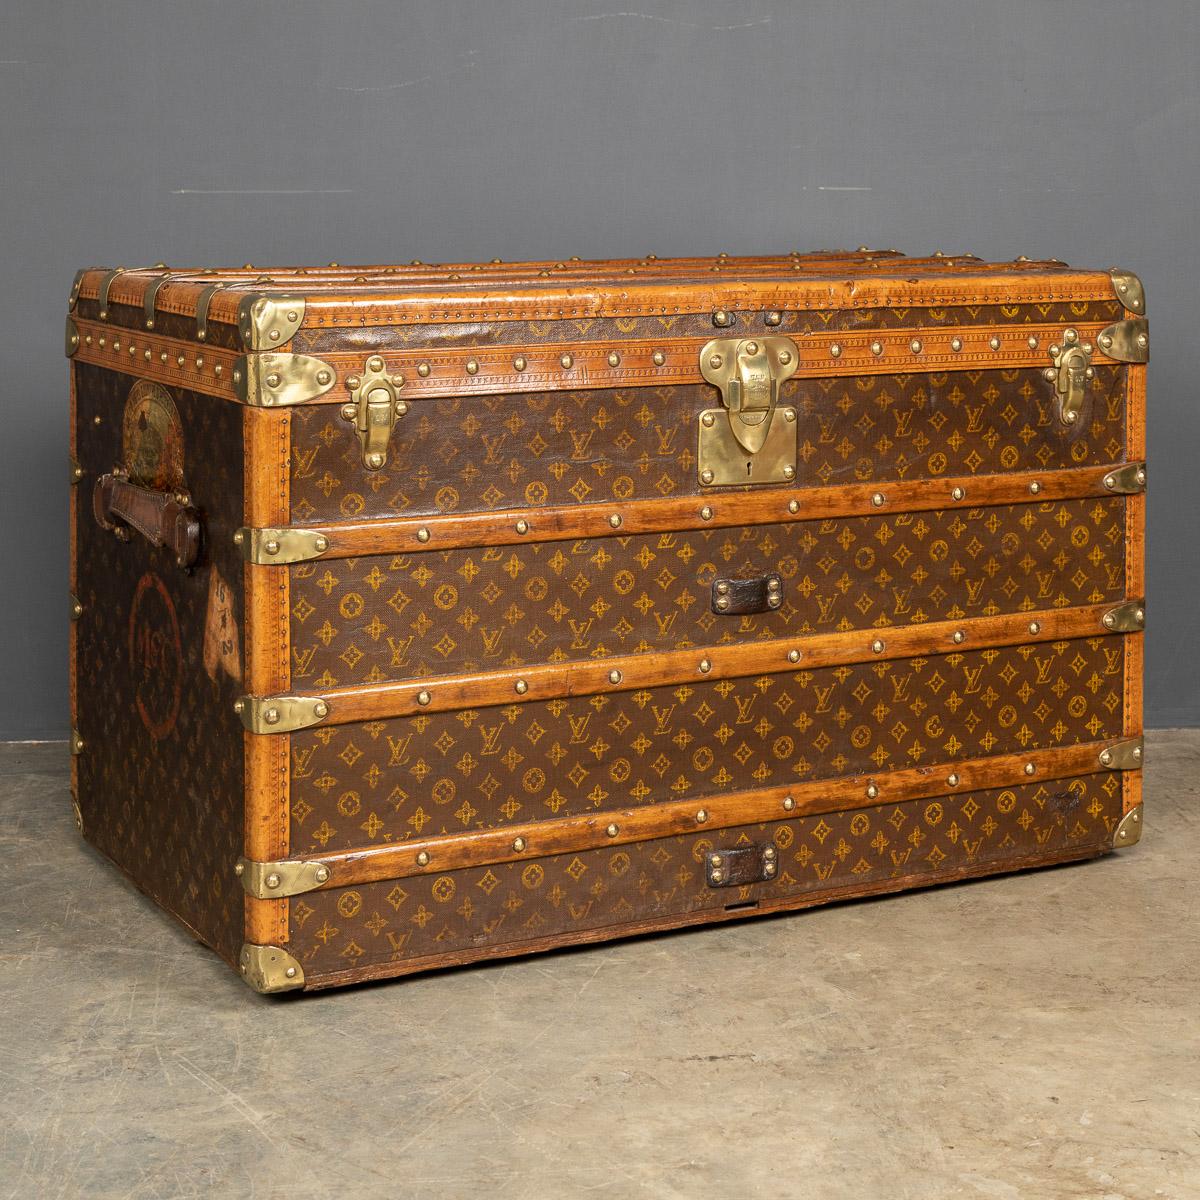 Antique early 20th century Louis Vuitton trunk covered in the world famous LV monogrammed canvas, with its lozine borders and brass fitting this trunk would have been the top of the line even at the time of purchase over 100 years ago. This